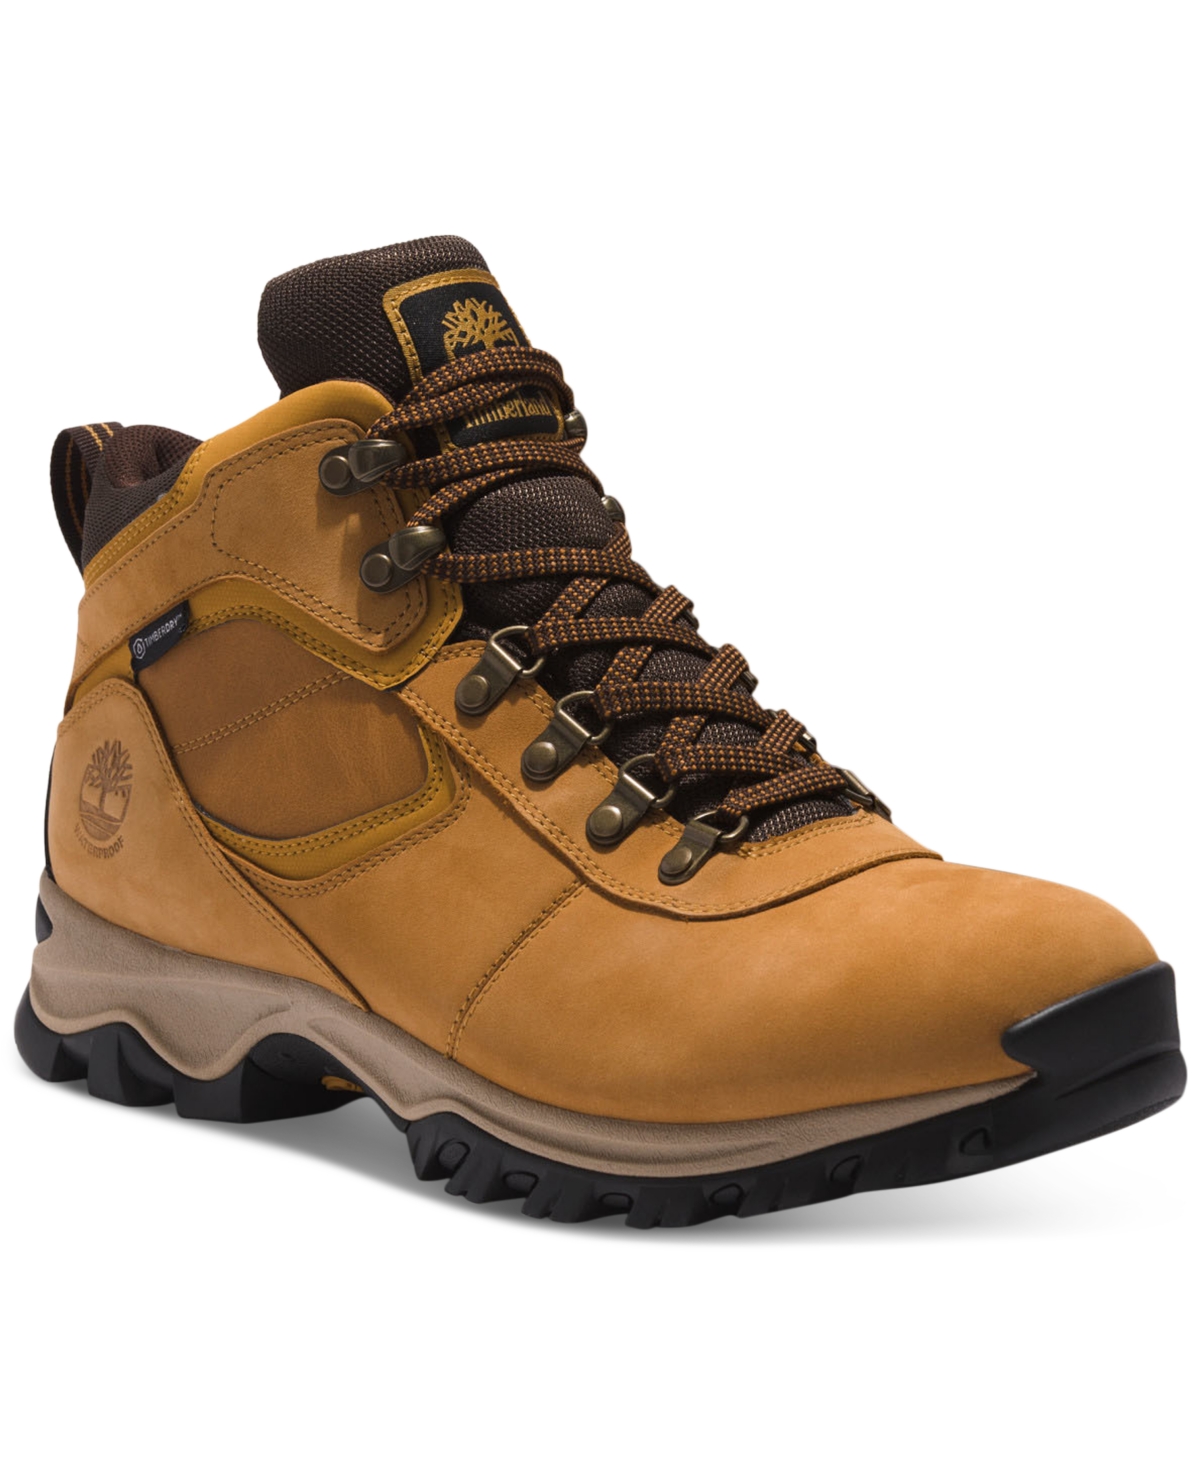 TIMBERLAND MEN'S MT. MADDSEN MID WATERPROOF HIKING BOOTS FROM FINISH LINE